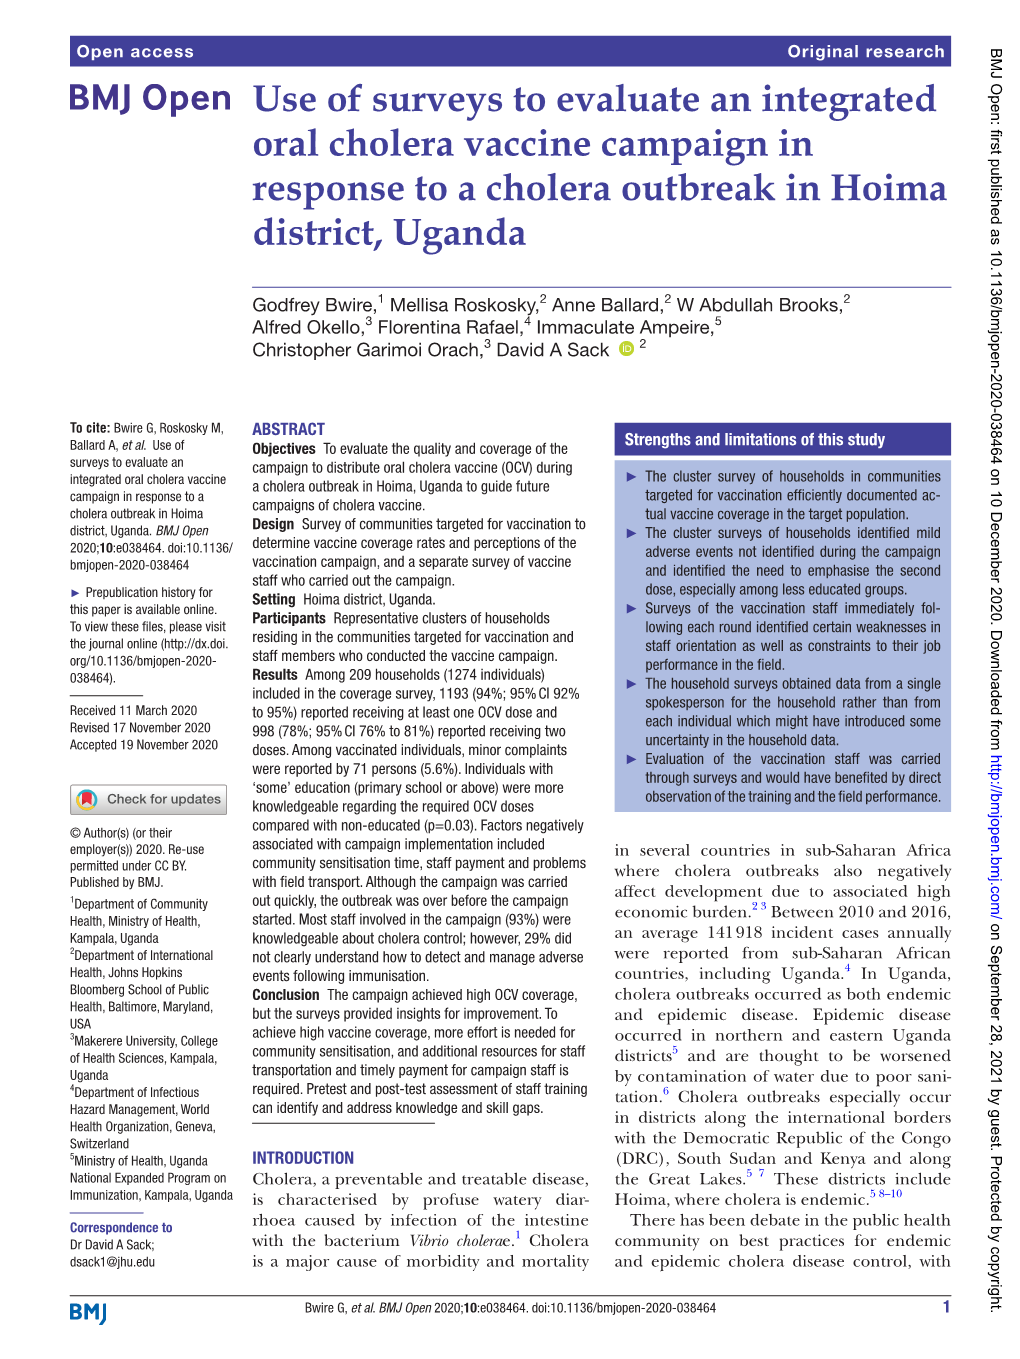 Use of Surveys to Evaluate an Integrated Oral Cholera Vaccine Campaign in Response to a Cholera Outbreak in Hoima District, Uganda